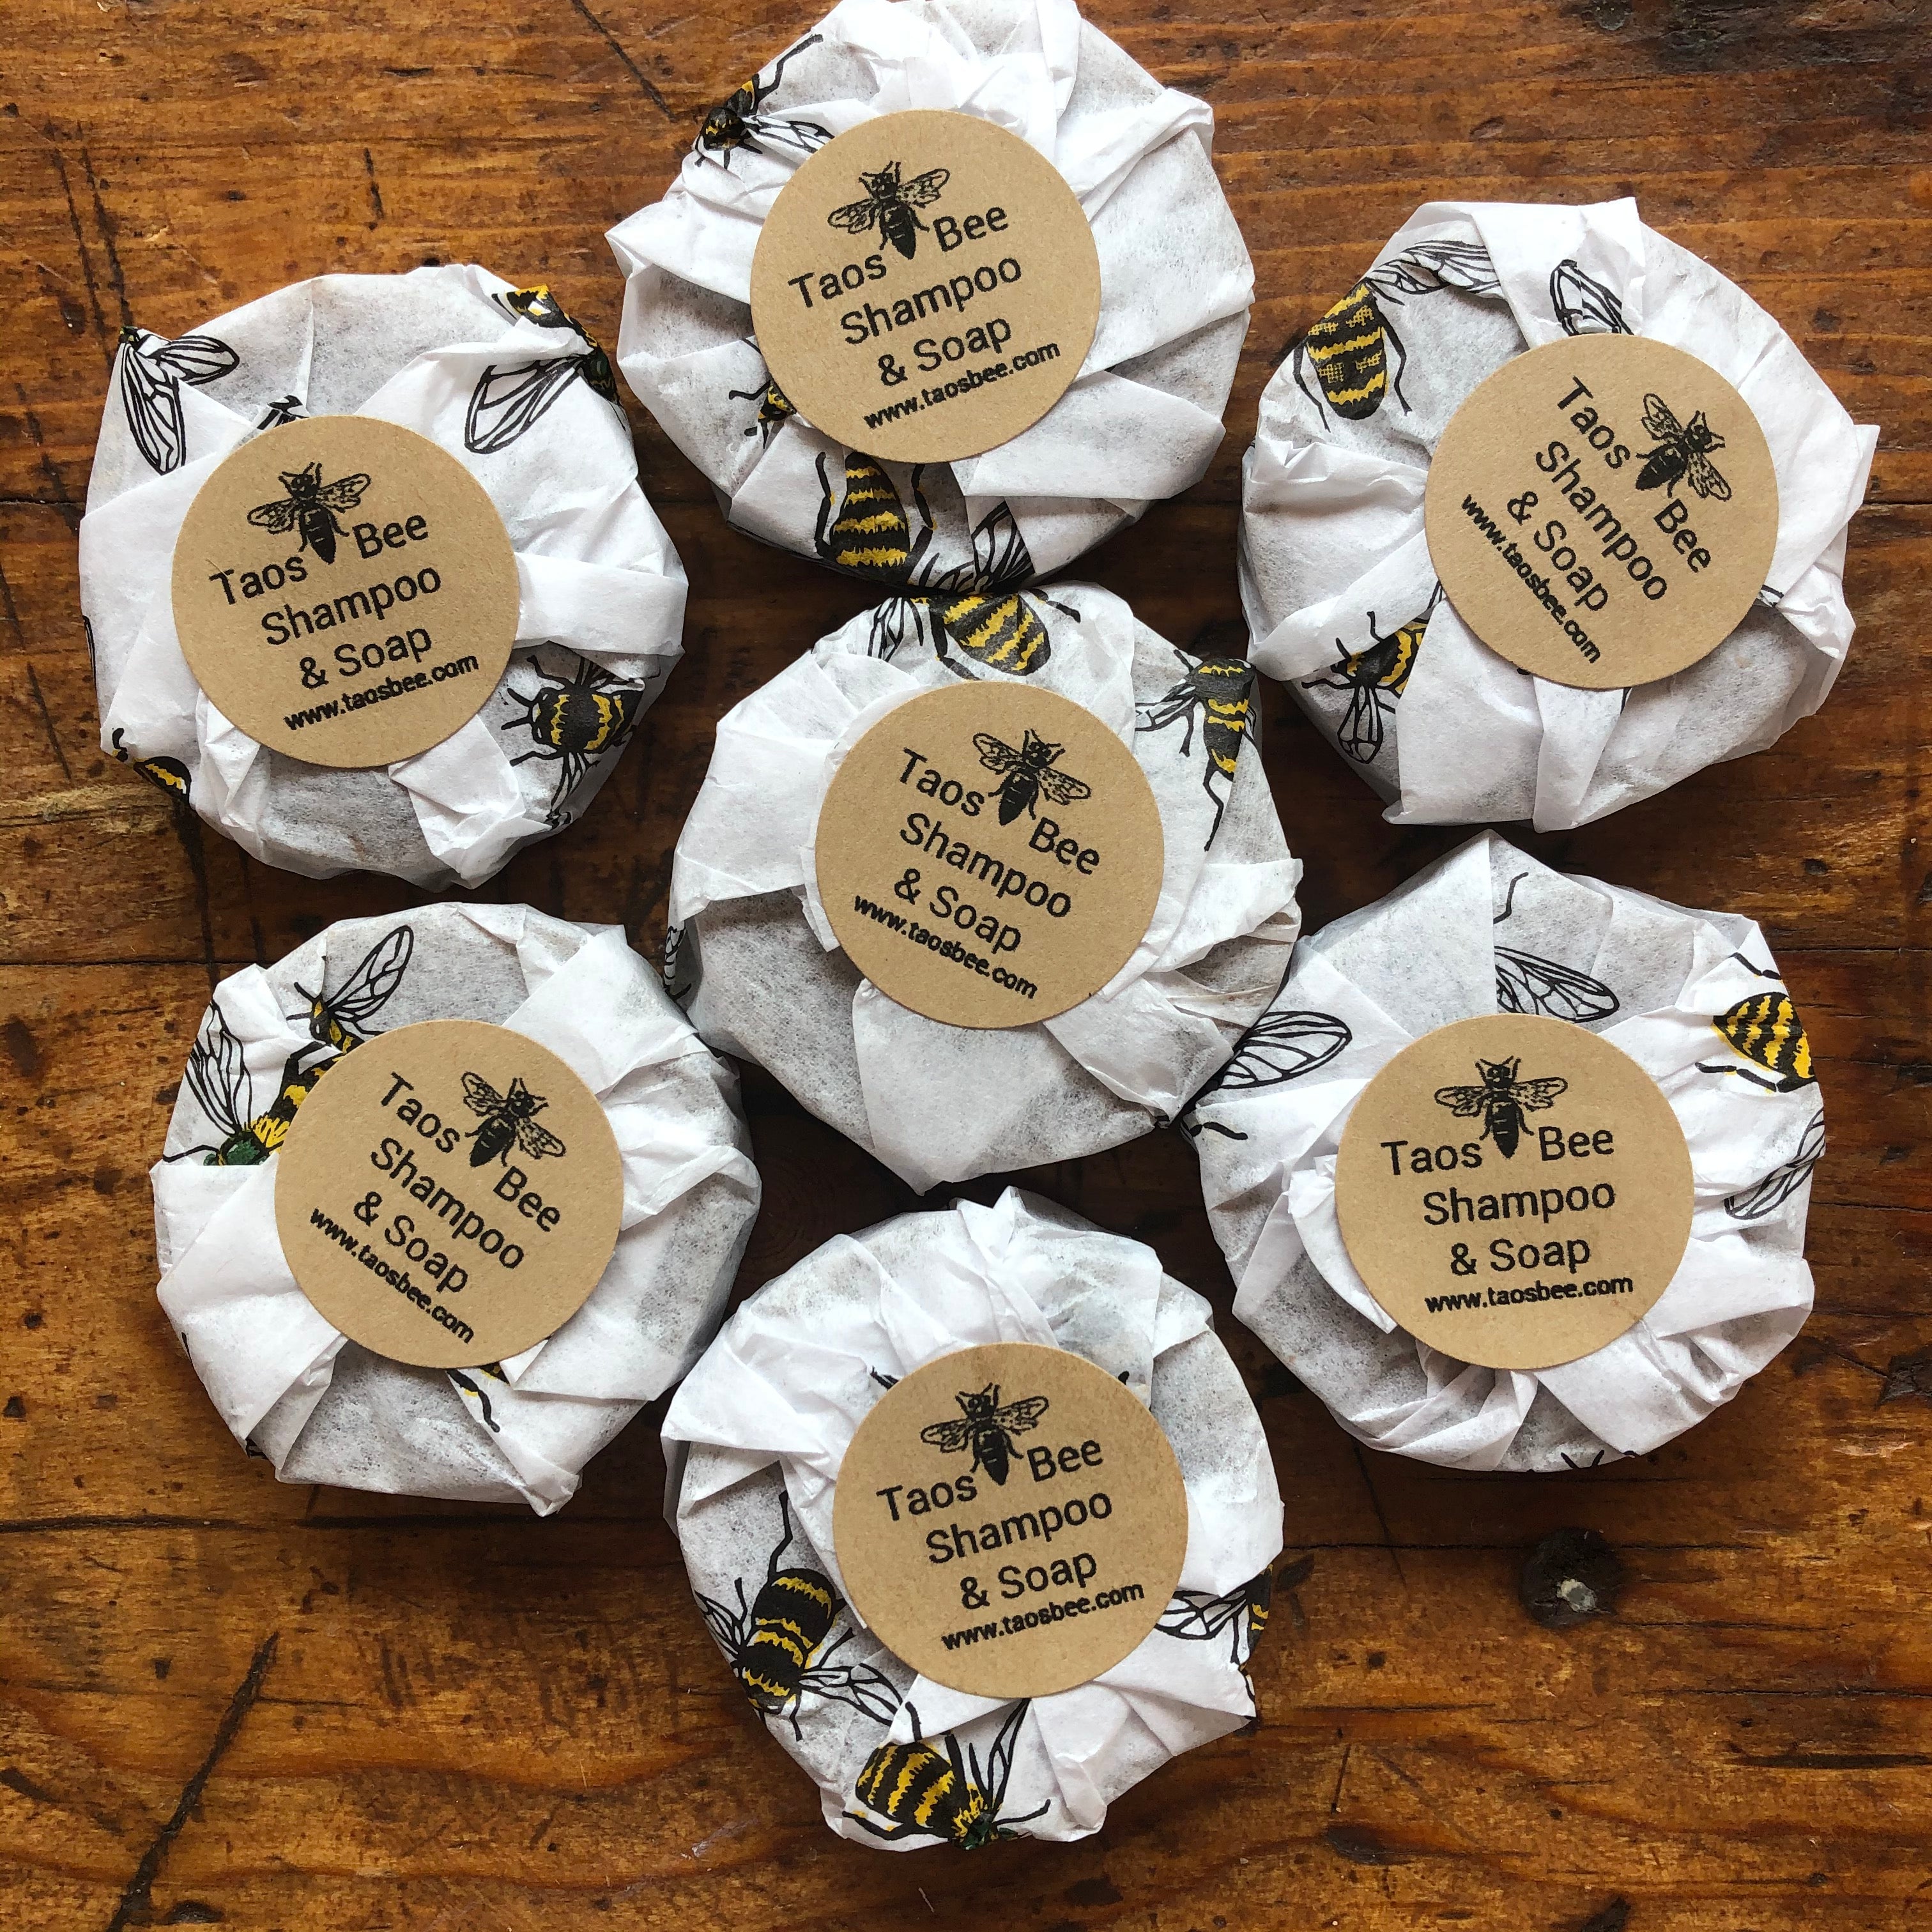 Honeybee Shampoo and Body Bar – Cleans and Conditions Naturally